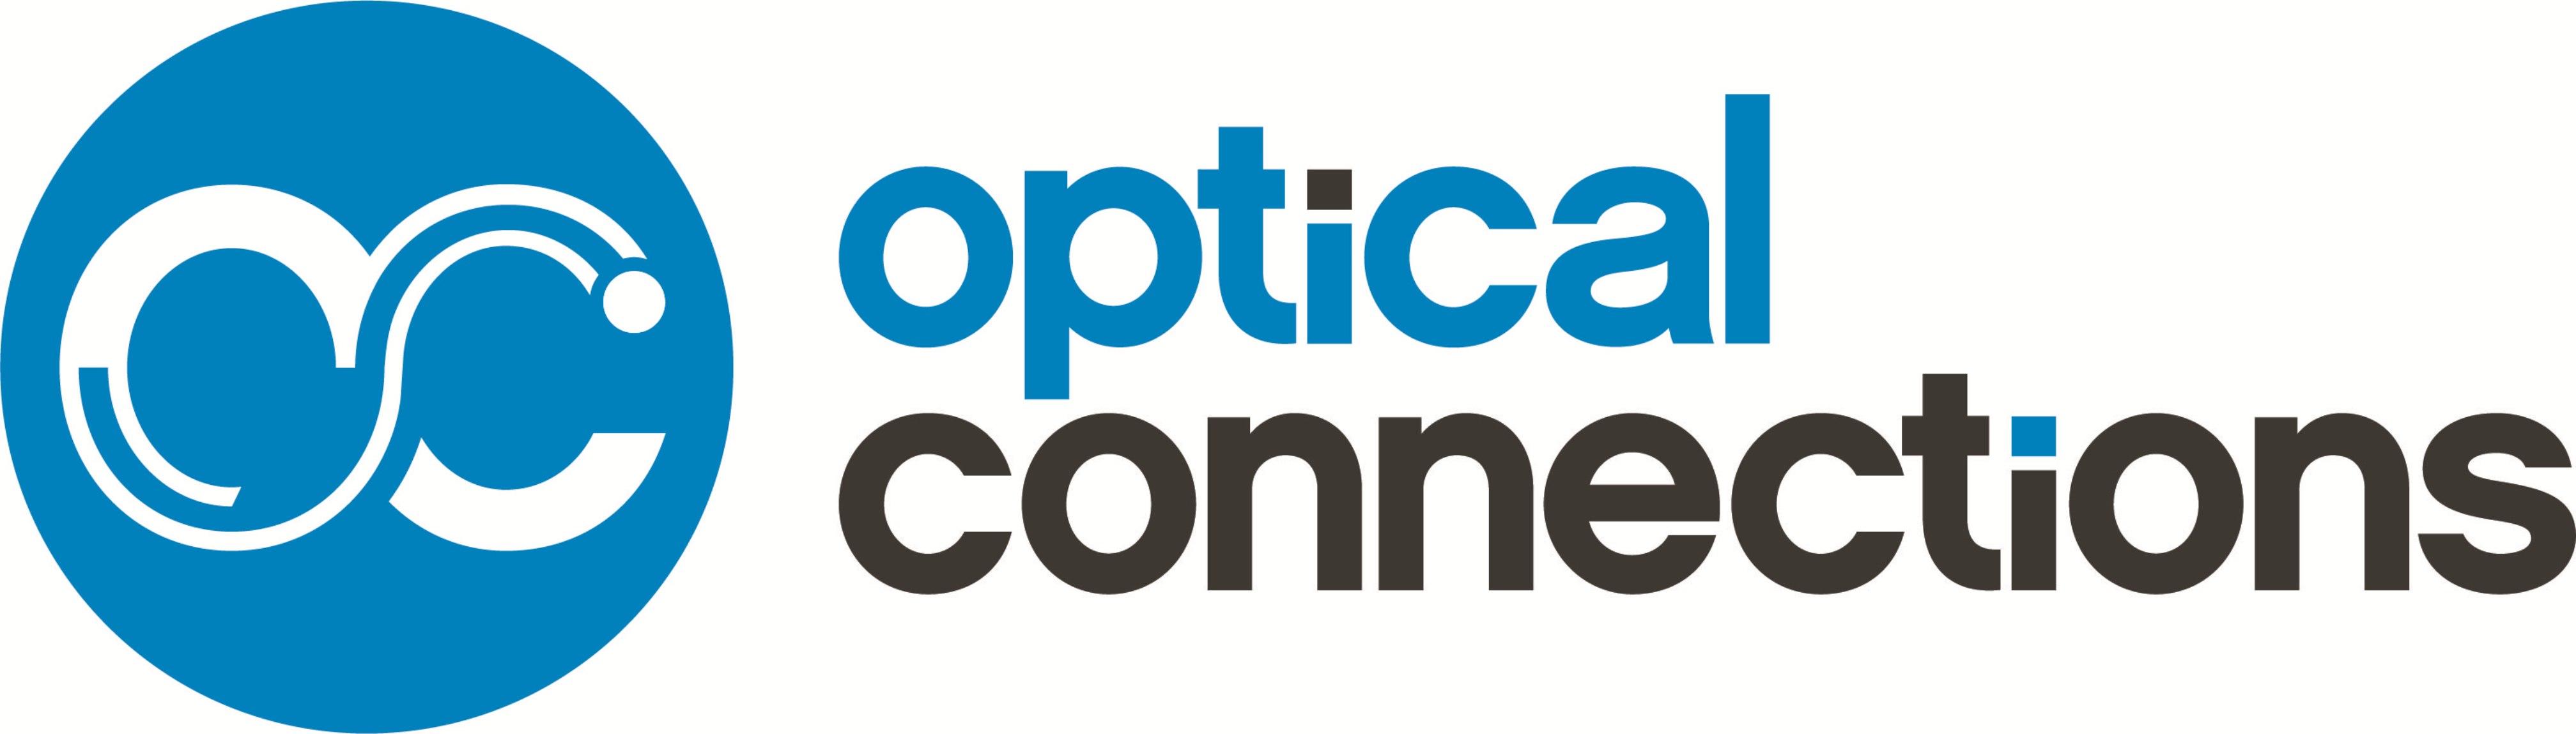 logo Optical Connections